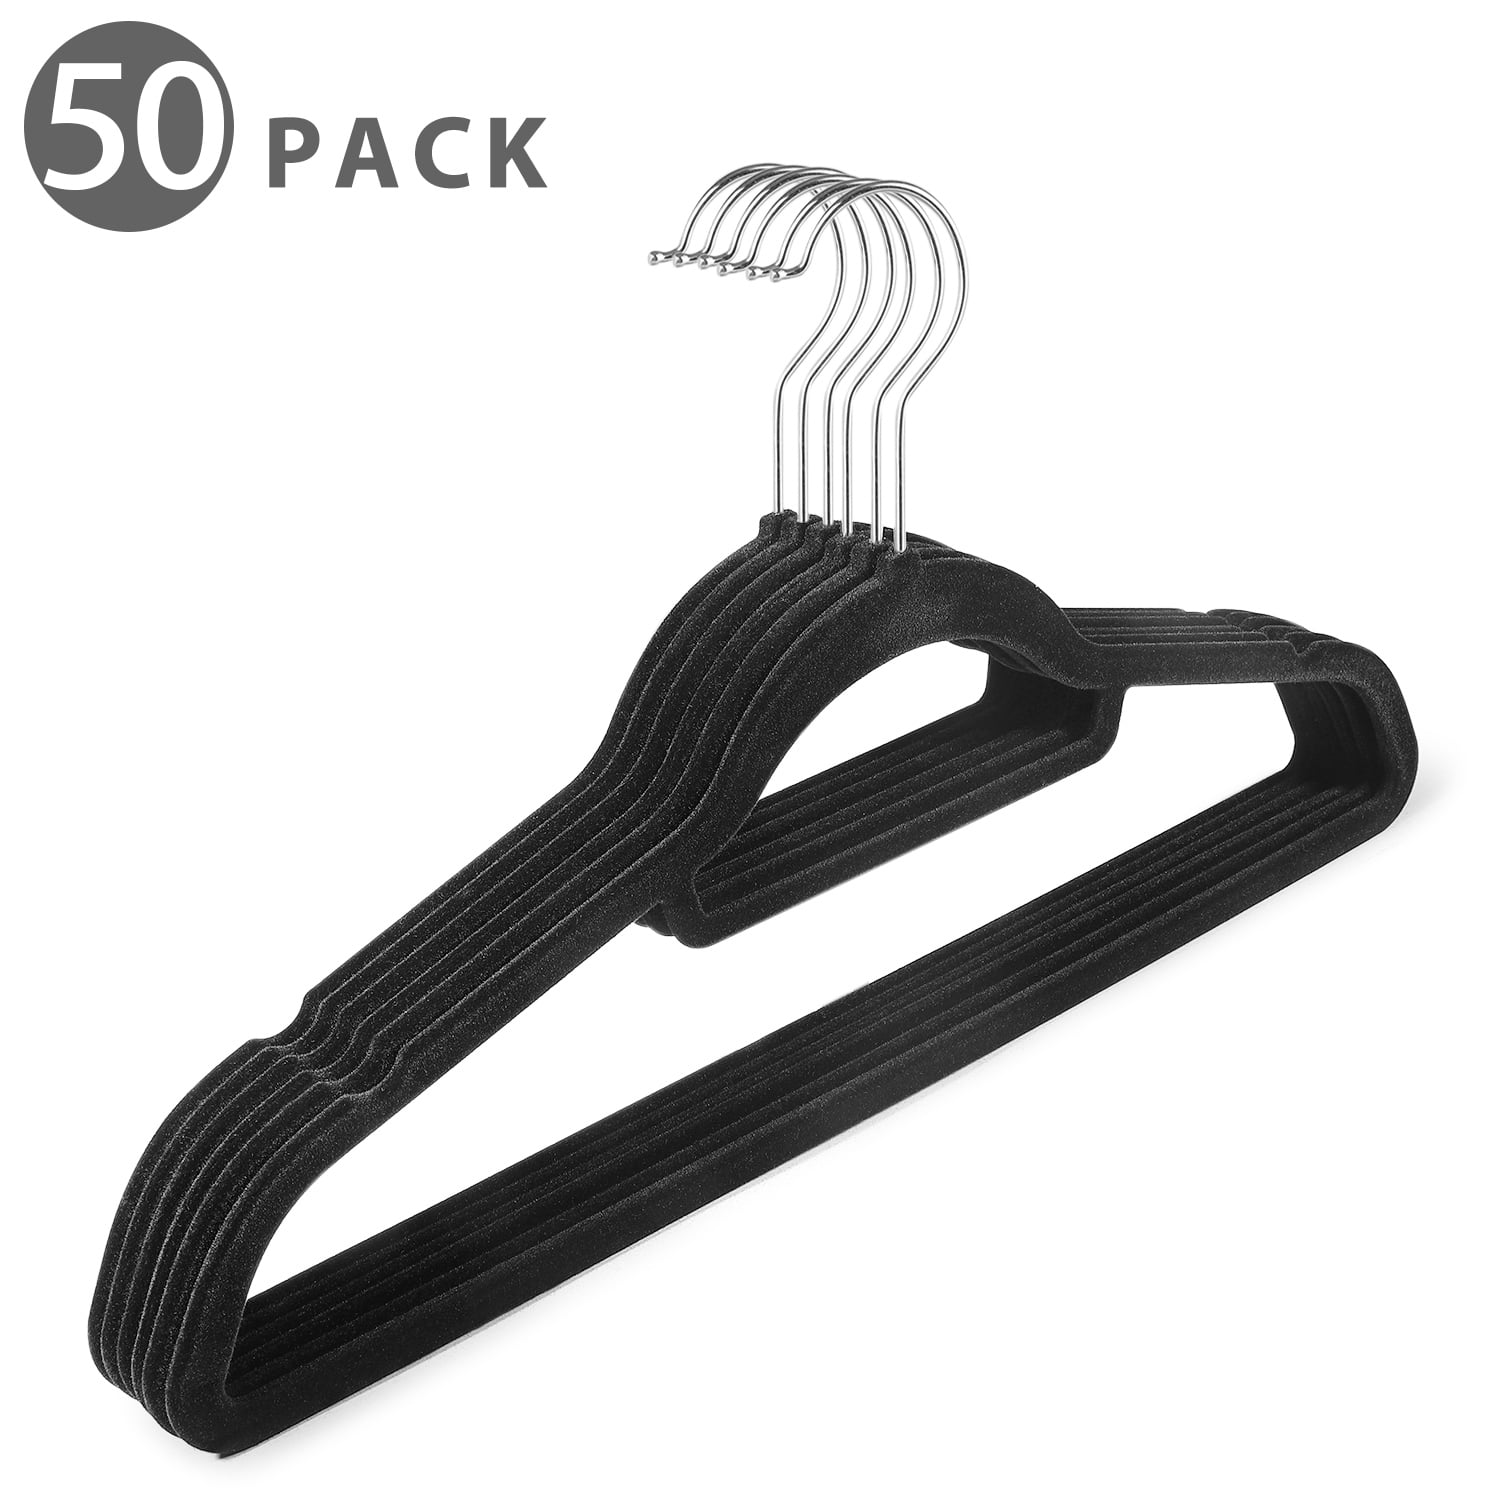 Non Slip Dress Hanger with Accessory Bar Space Saving Flexzion Velvet Hanger 10 Pack Strong and Durable with 360 Degree Swivel Hook Gray Contoured Shoulder for Shirts Clothes Coat Suit Pants 